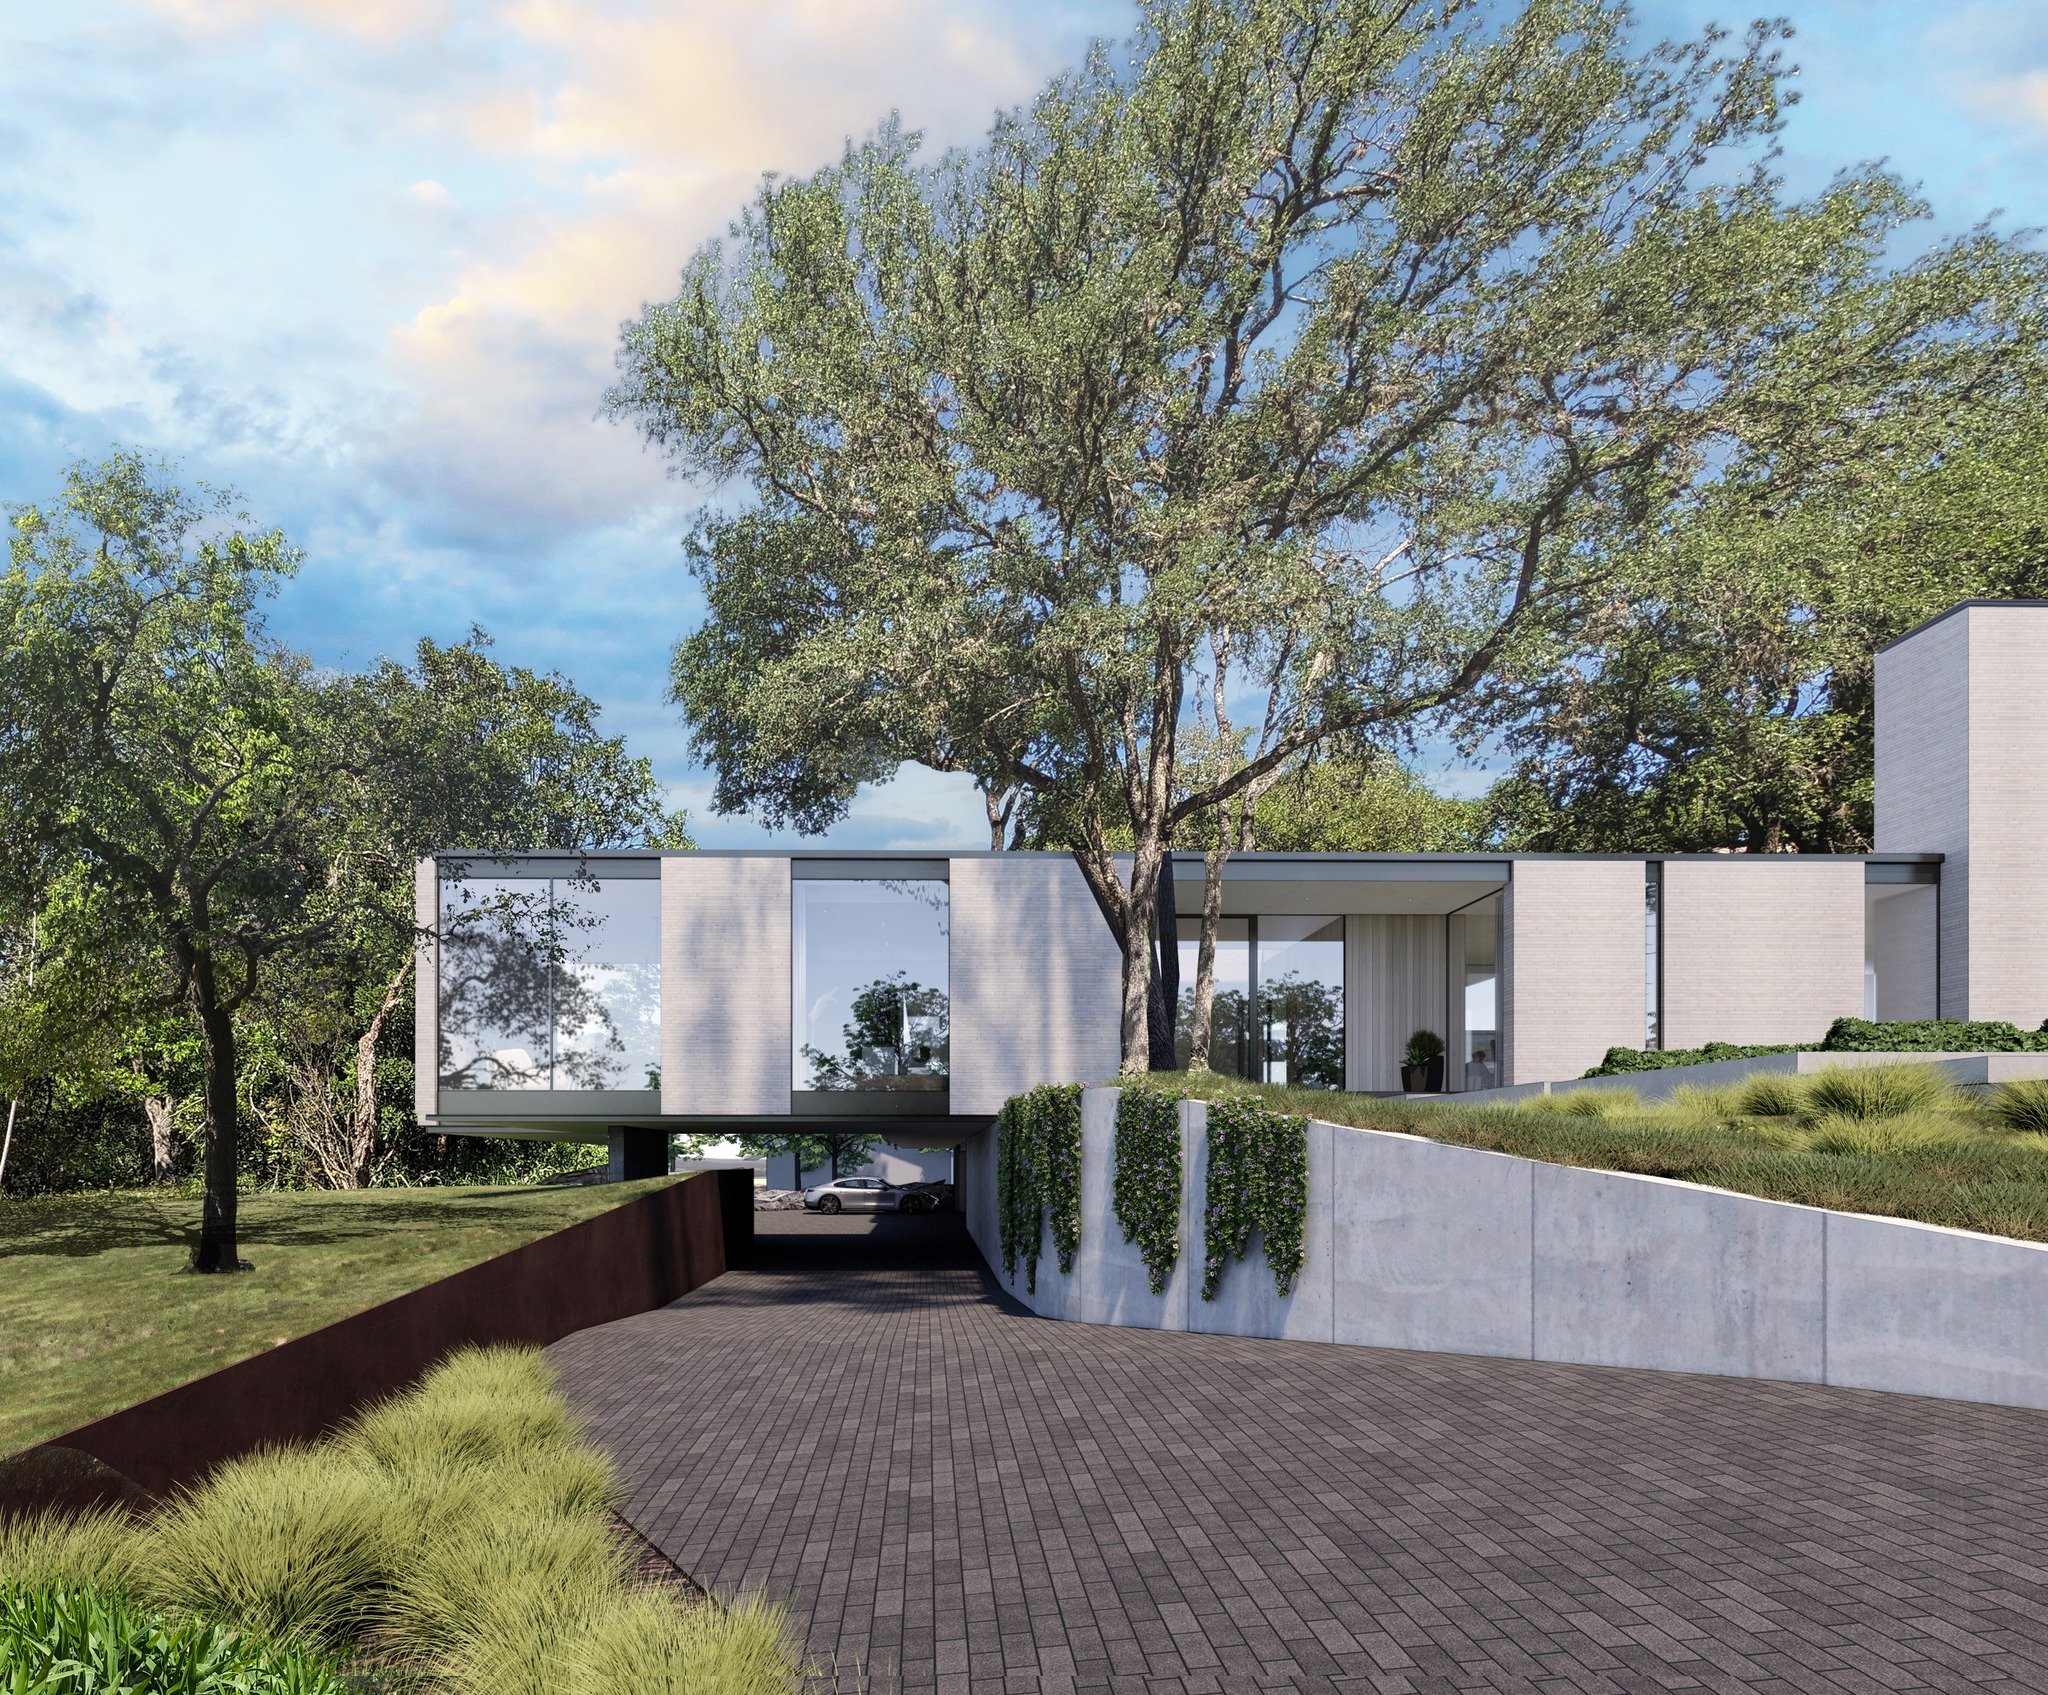 Vale Residence - Austin, TX | In development

#Rollingwood #austin #architecture #texas #modern #vale #courtyardhouse #modern #contemporary #design #house